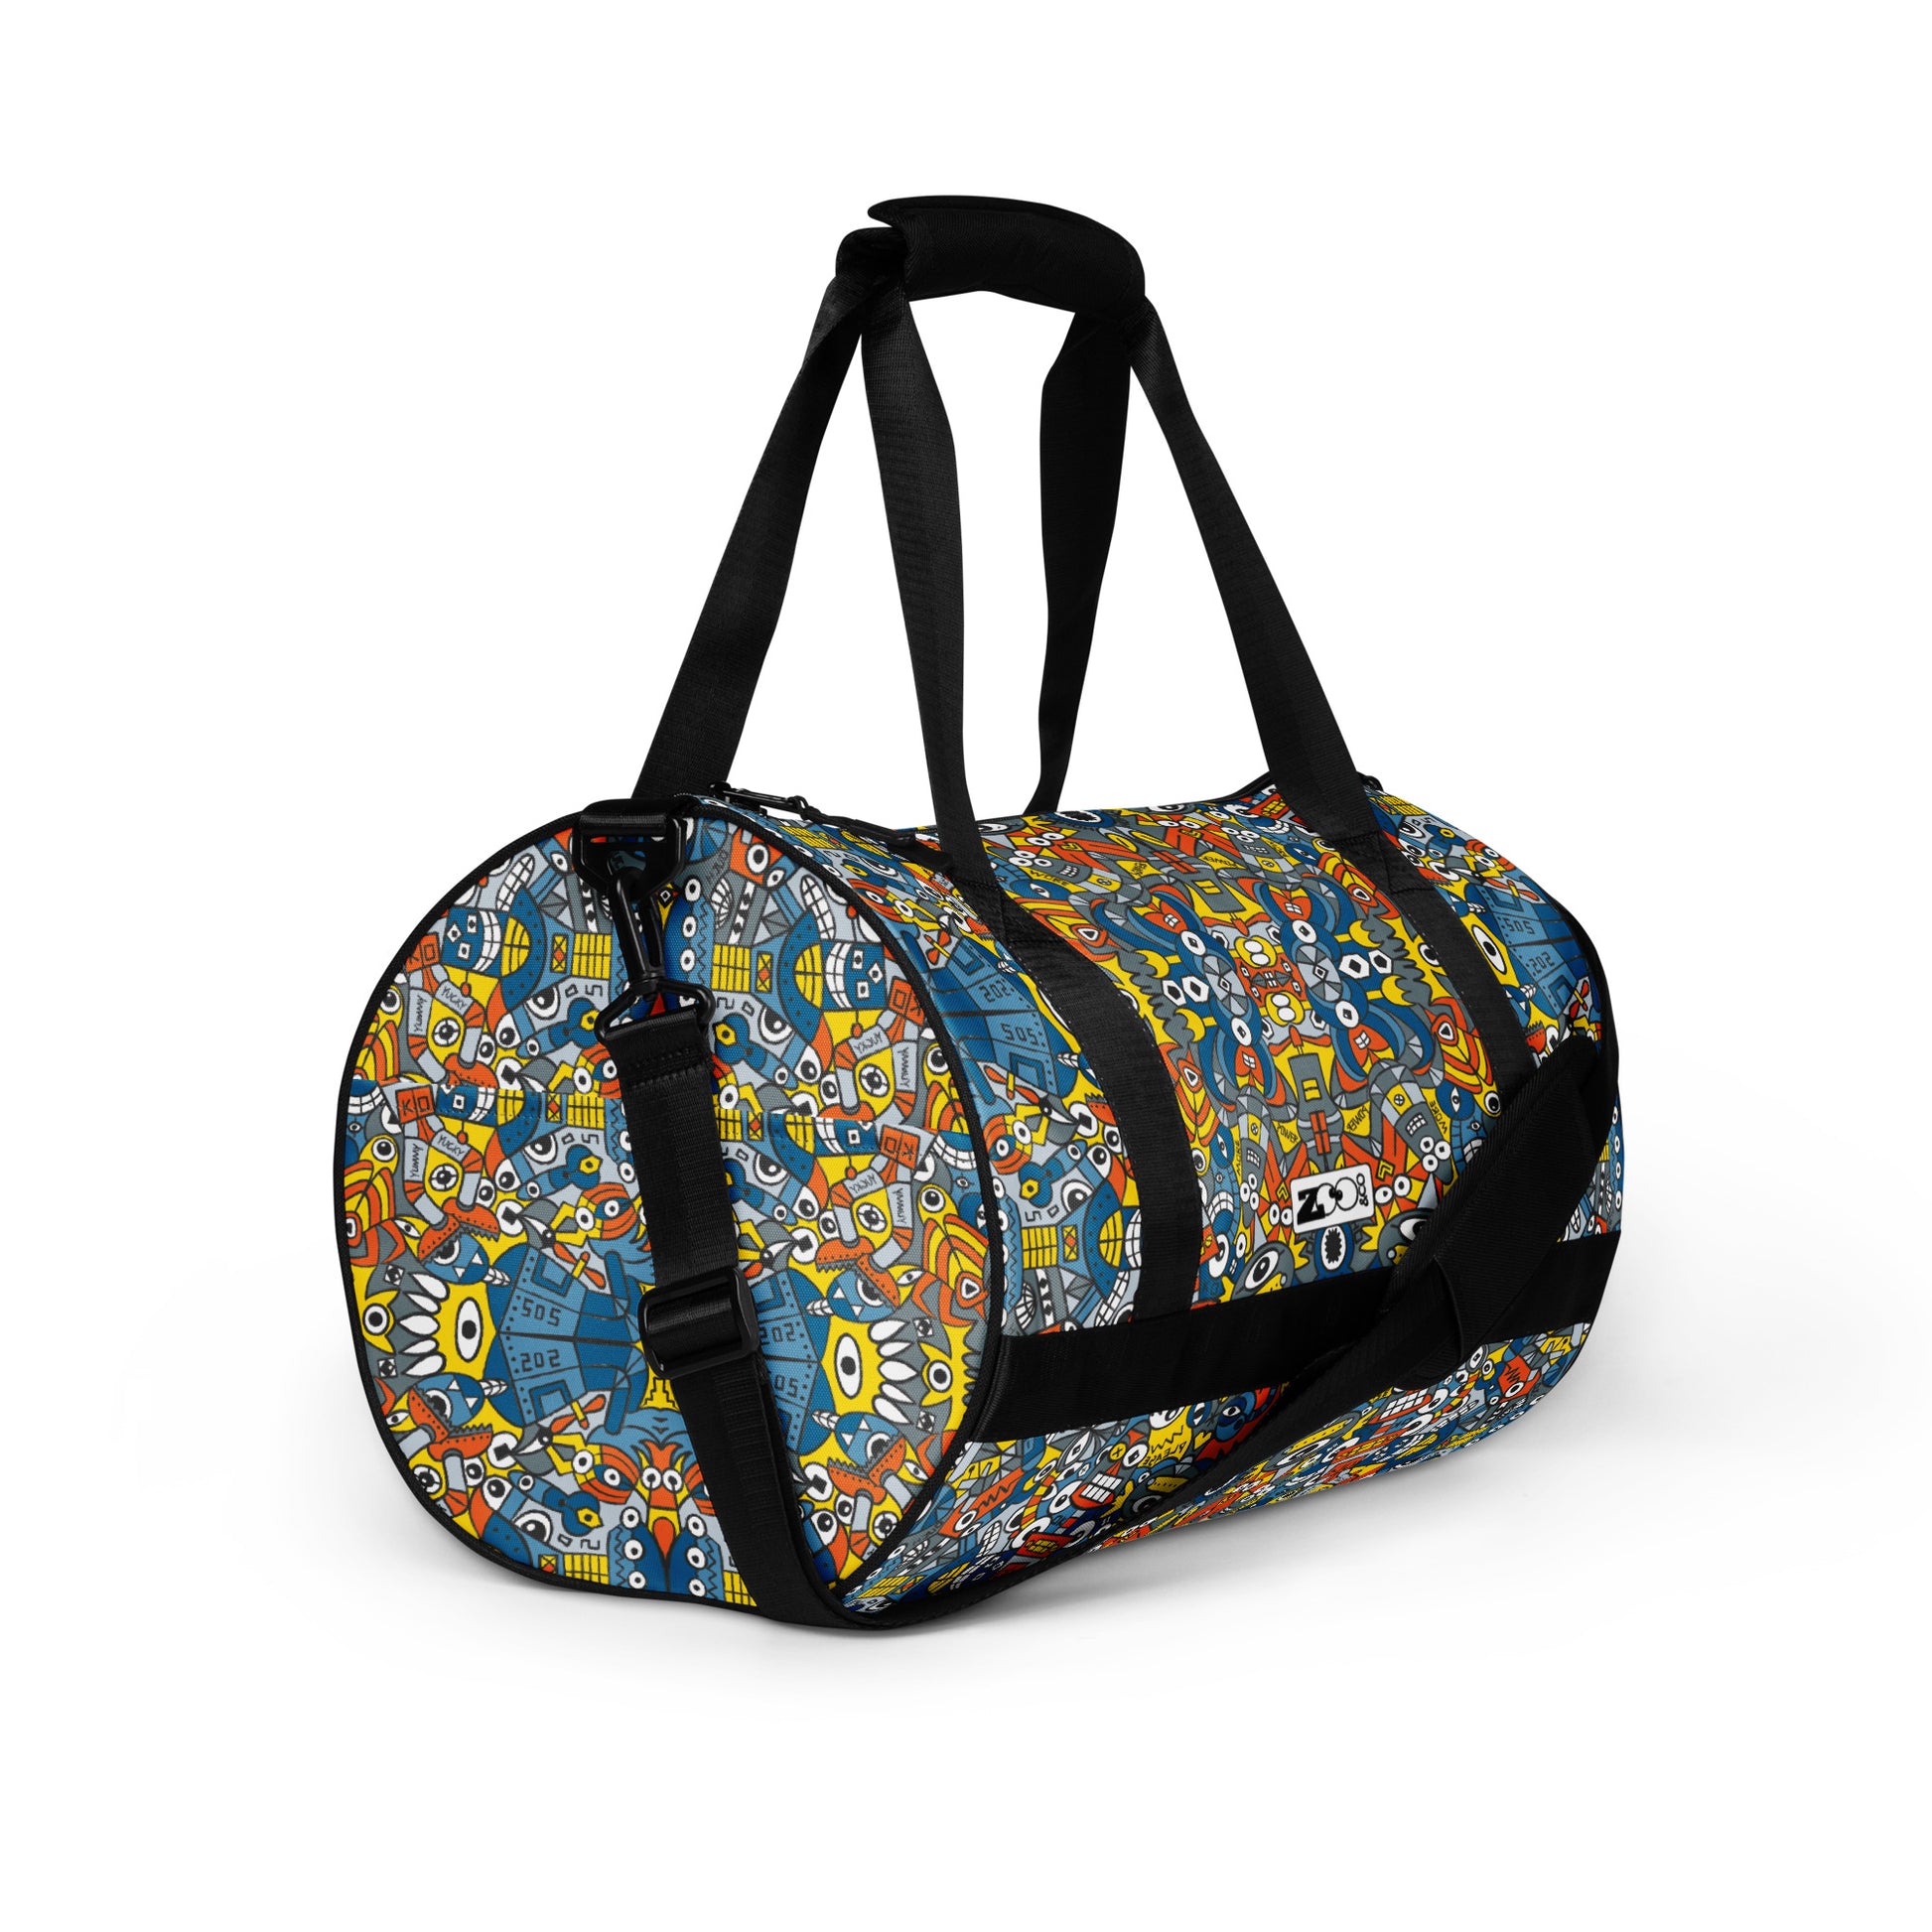 Retro robots doodle art All-over print gym bag. Right front view